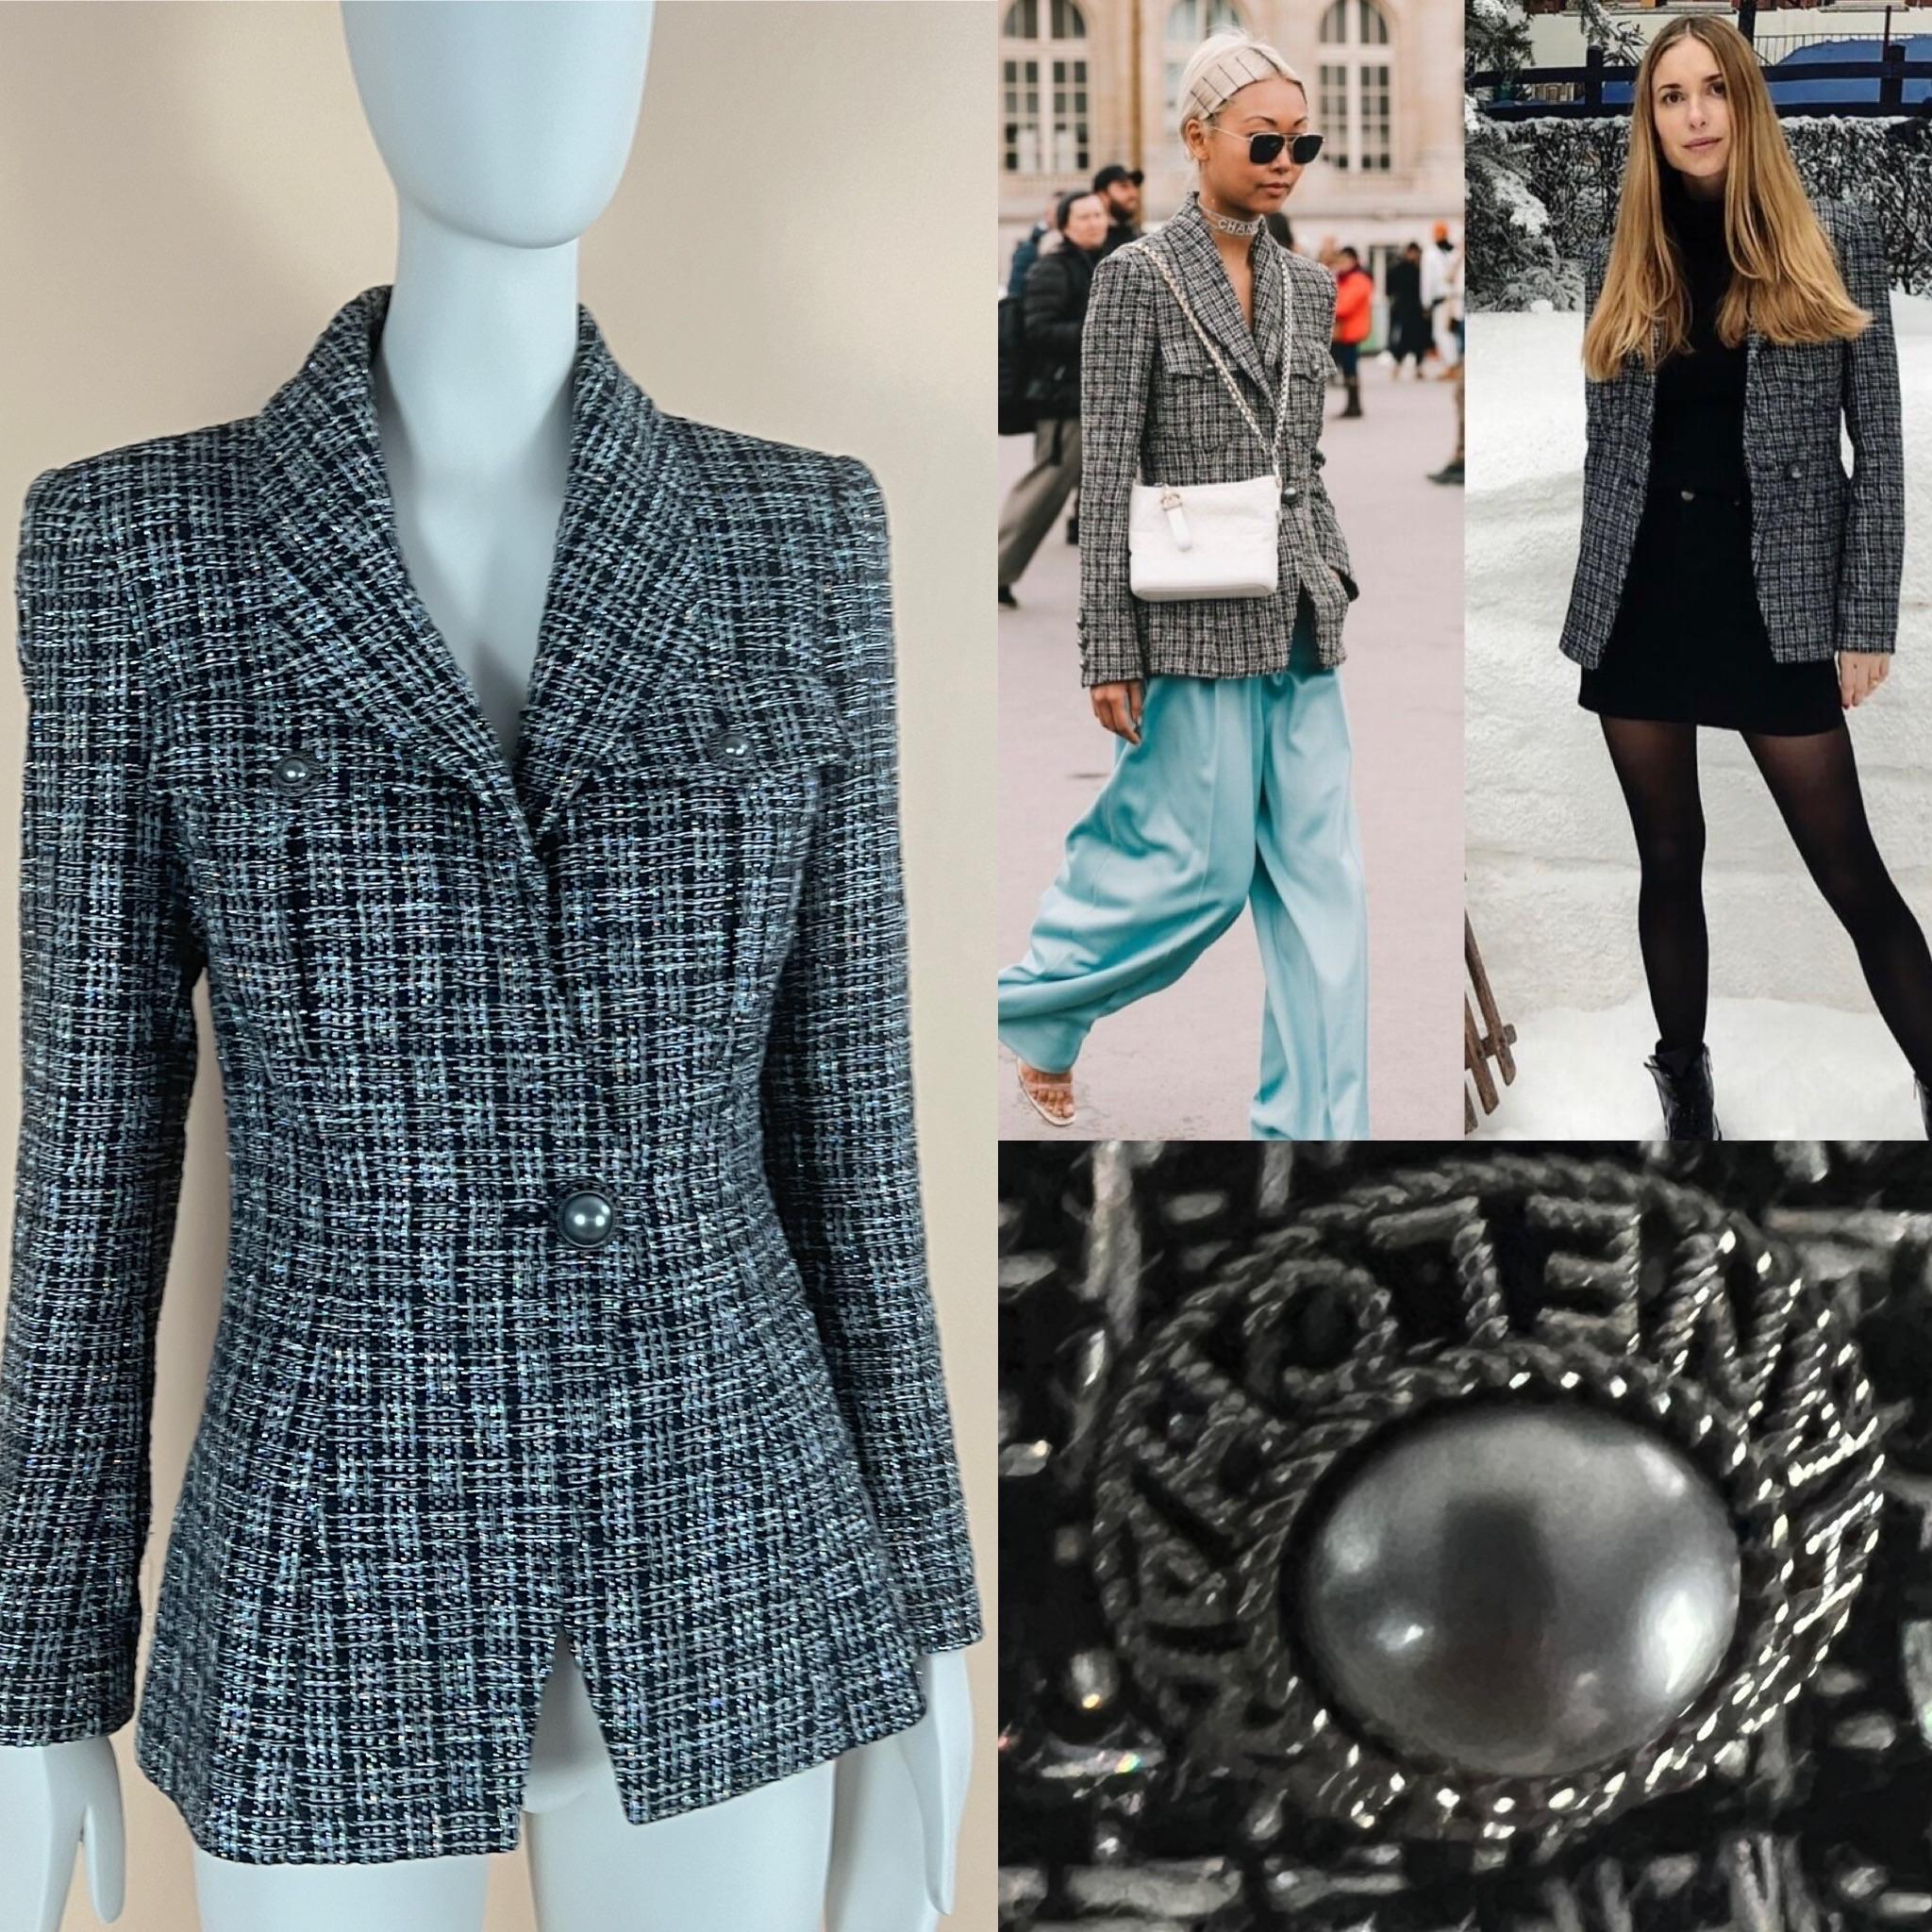 No import taxes payment needed by delivery (would be sent as gift)
Stunning Chanel black tweed jacket from 2019 spring collection
As seen on many fashionistas!
- made of black lesage tweed with ''rainbow'' subtle iridescent shimmering
- beautiful